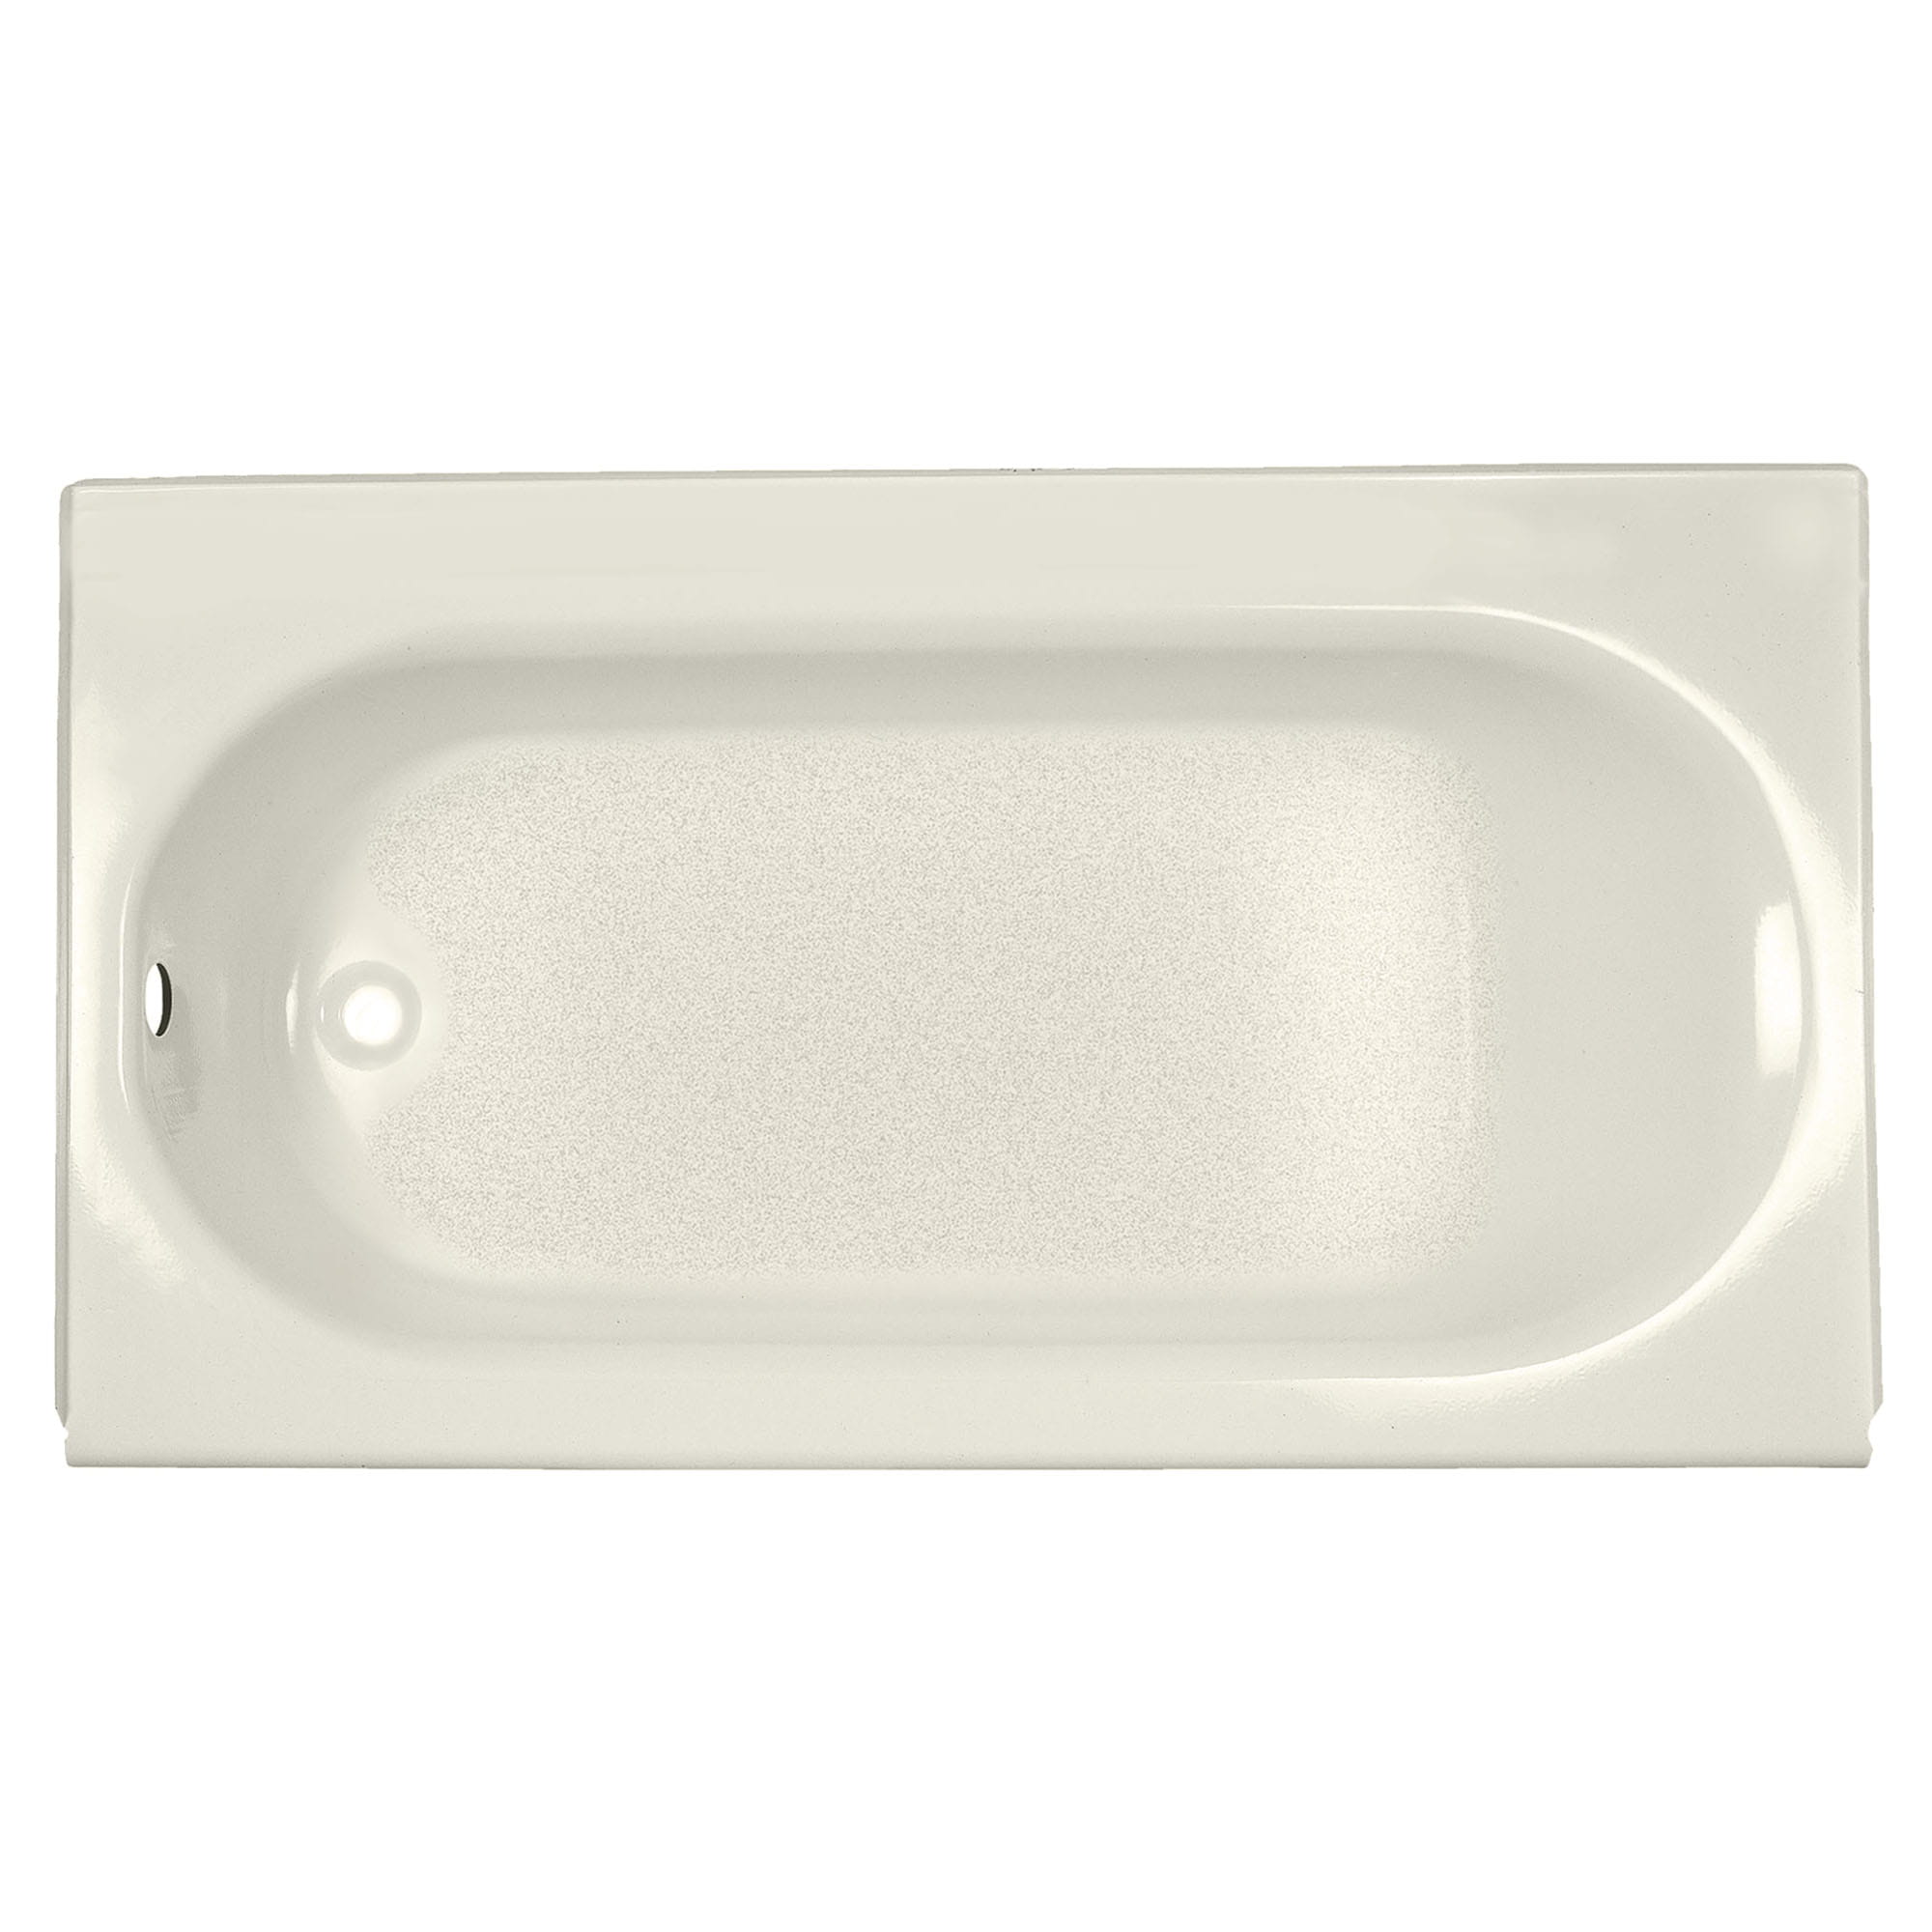 Princeton Americast 60 x 34 Inch Integral Apron Bathtub Left Hand Outlet With Luxury Ledge LINEN